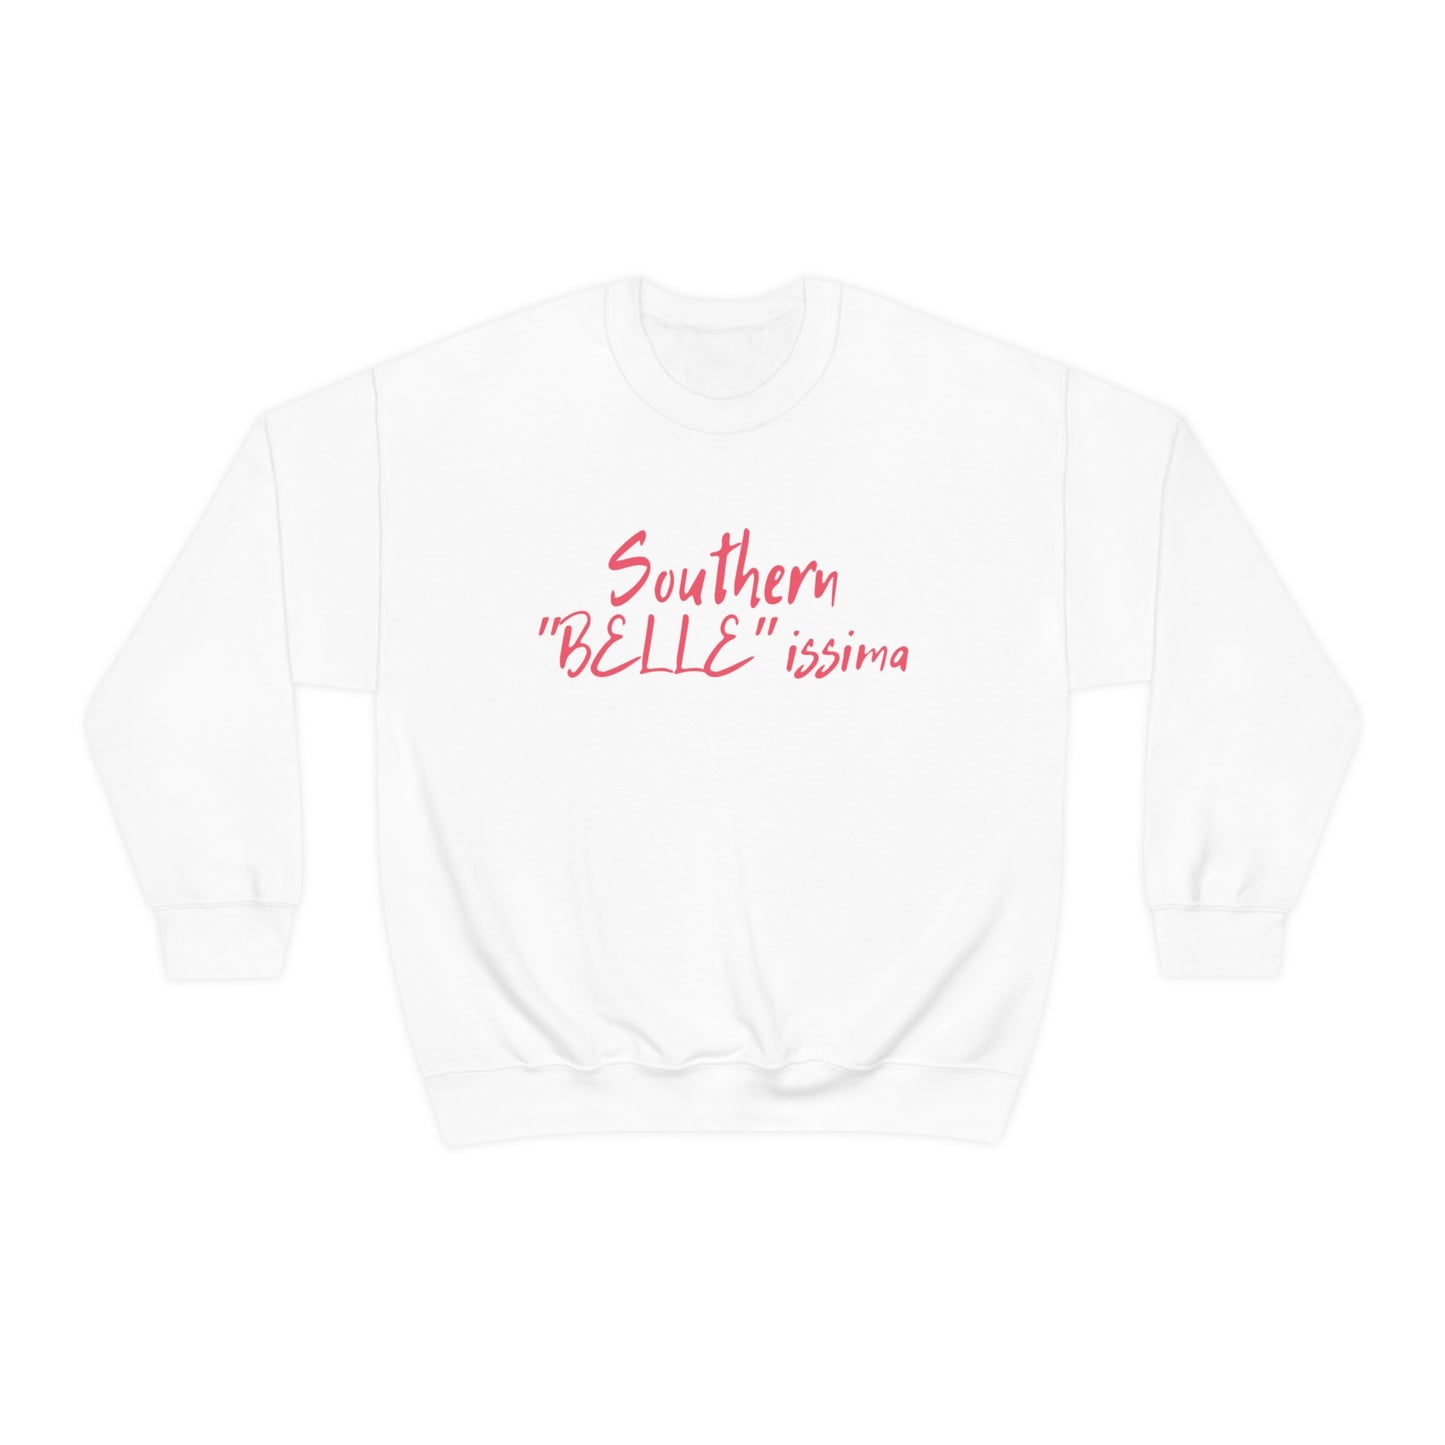 Southern "Belle"issima Sweatshirt - Perfectly Pink